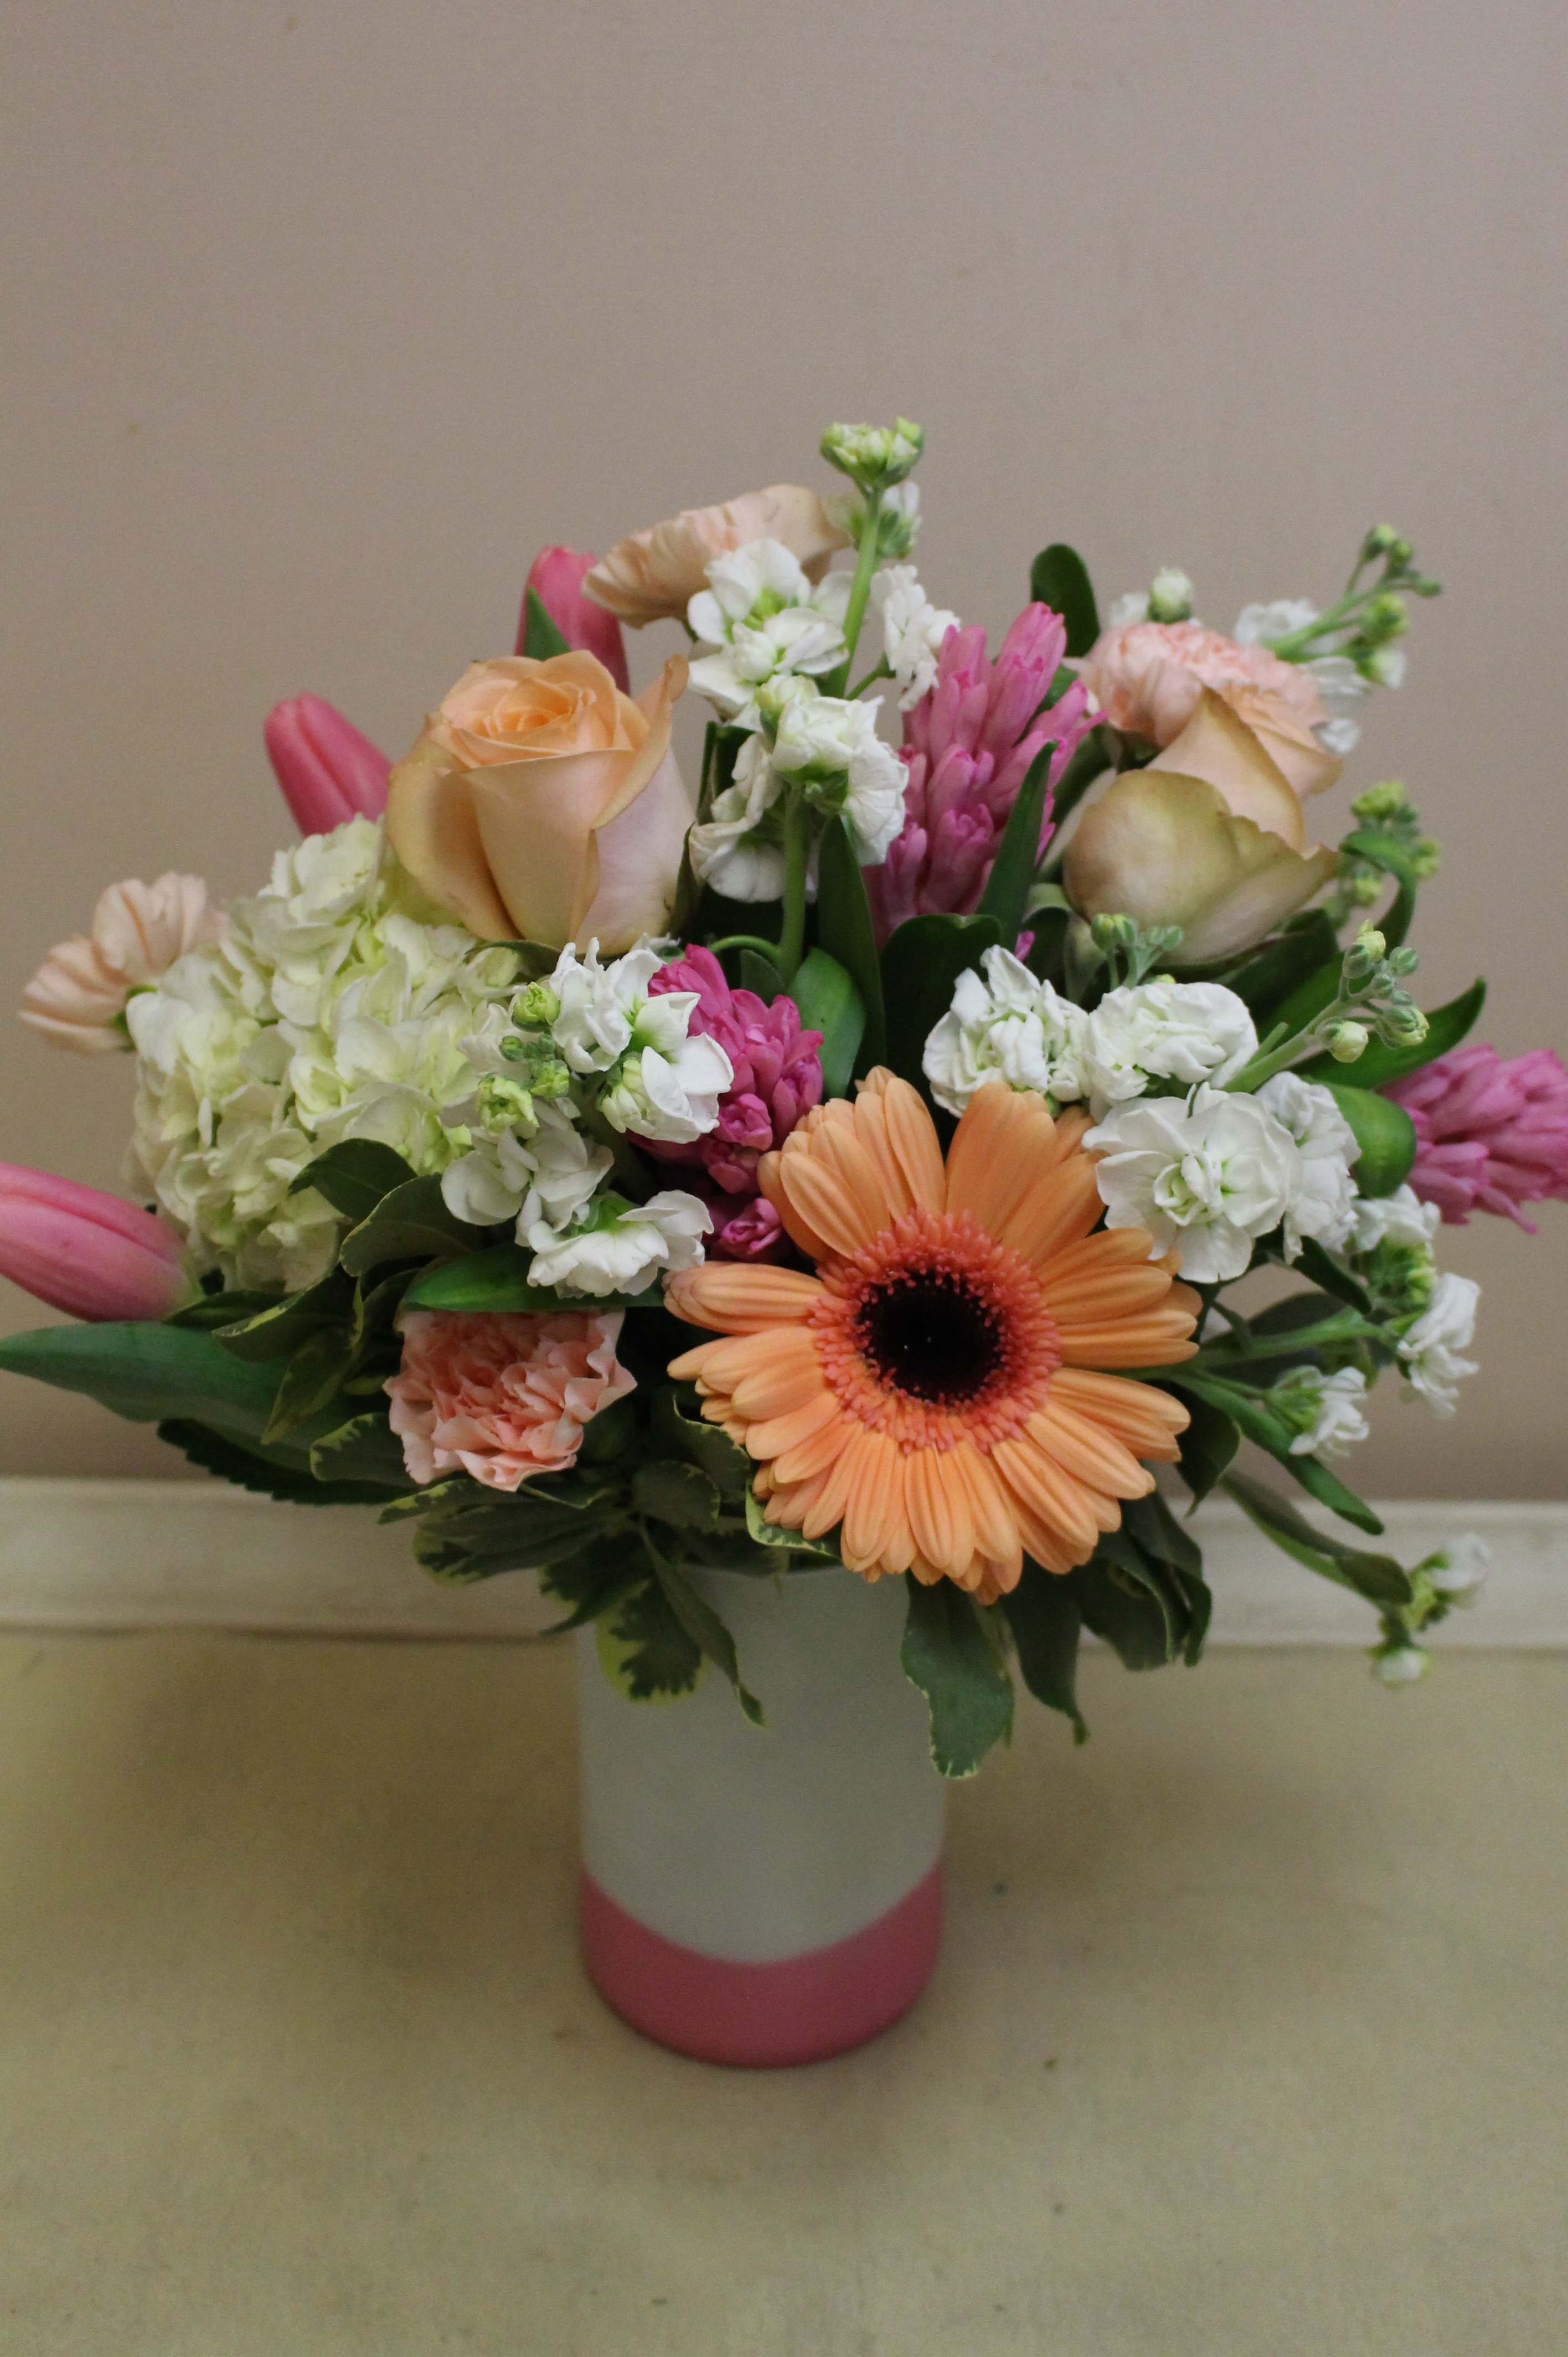 bubble gum dreams - peaches and deep pinks fill this vase.  tulips and hyacinth, gerberas and more